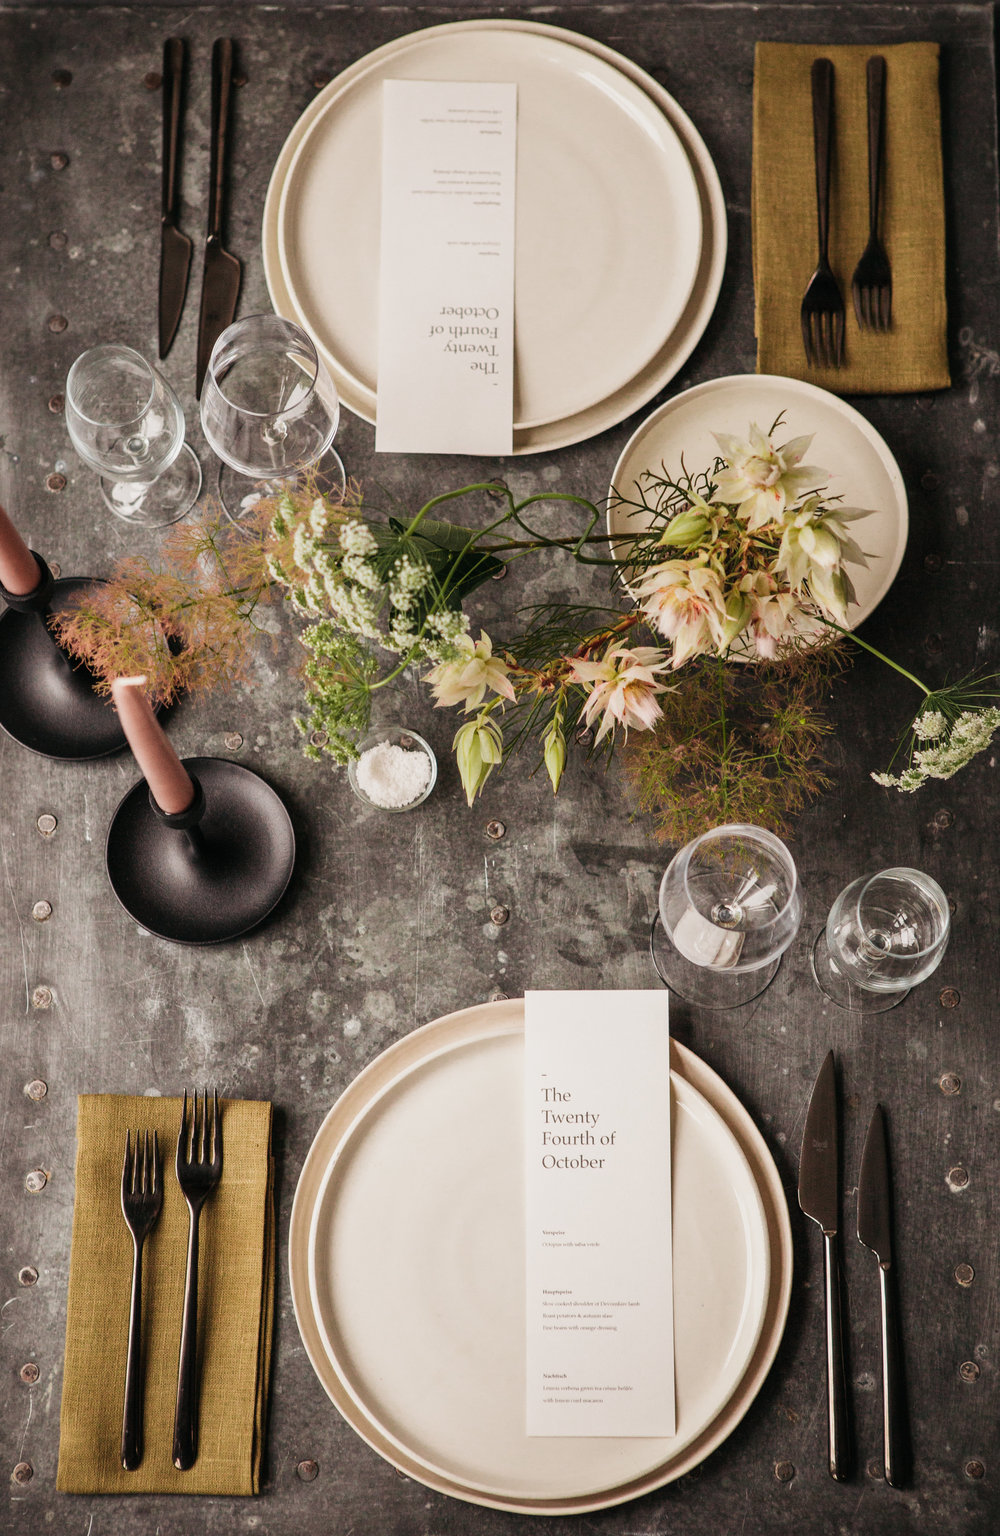 10 wedding tablescapes to inspire your Thanksgiving